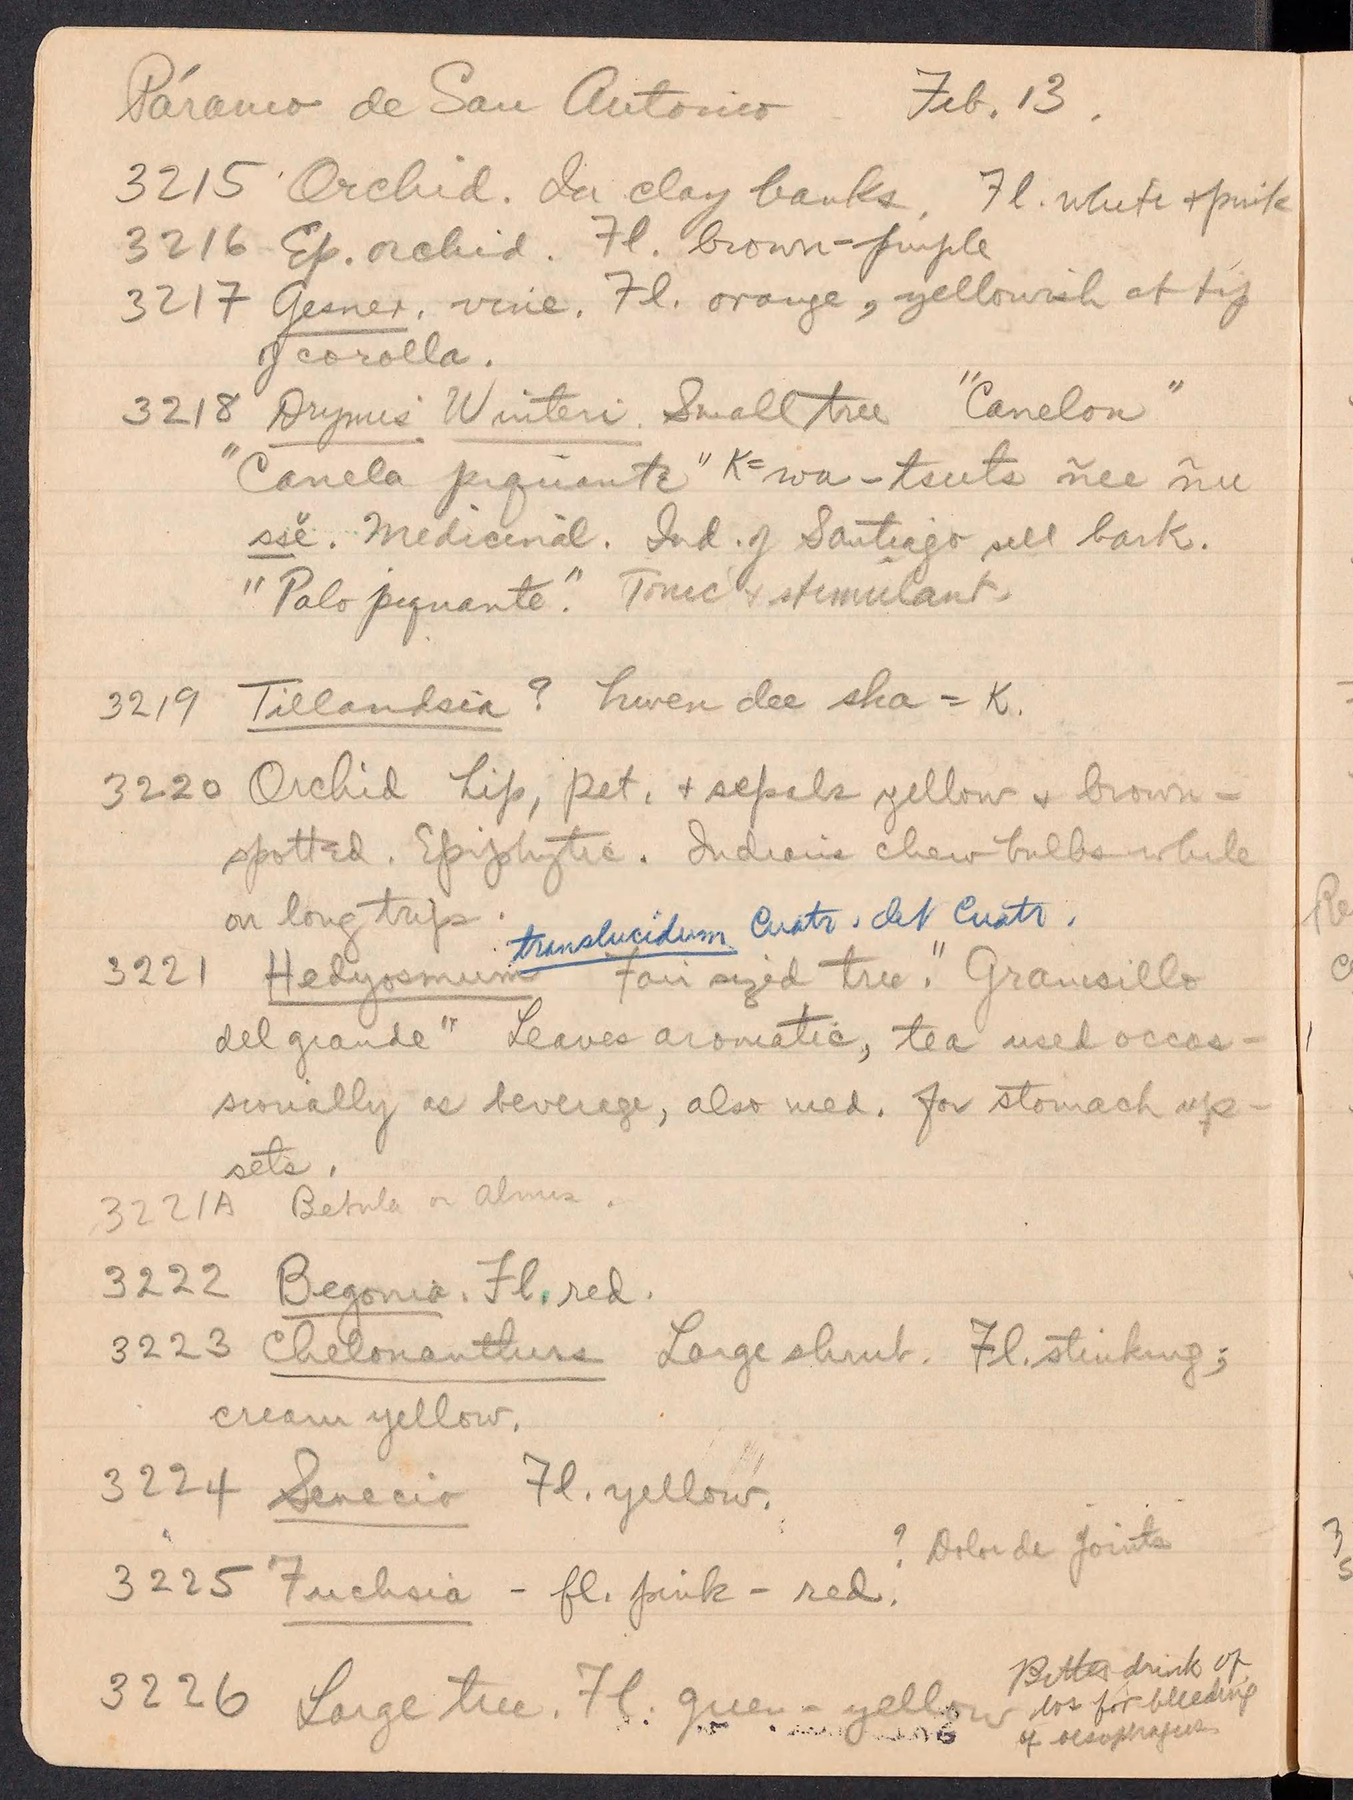 page from a handwritten notebook